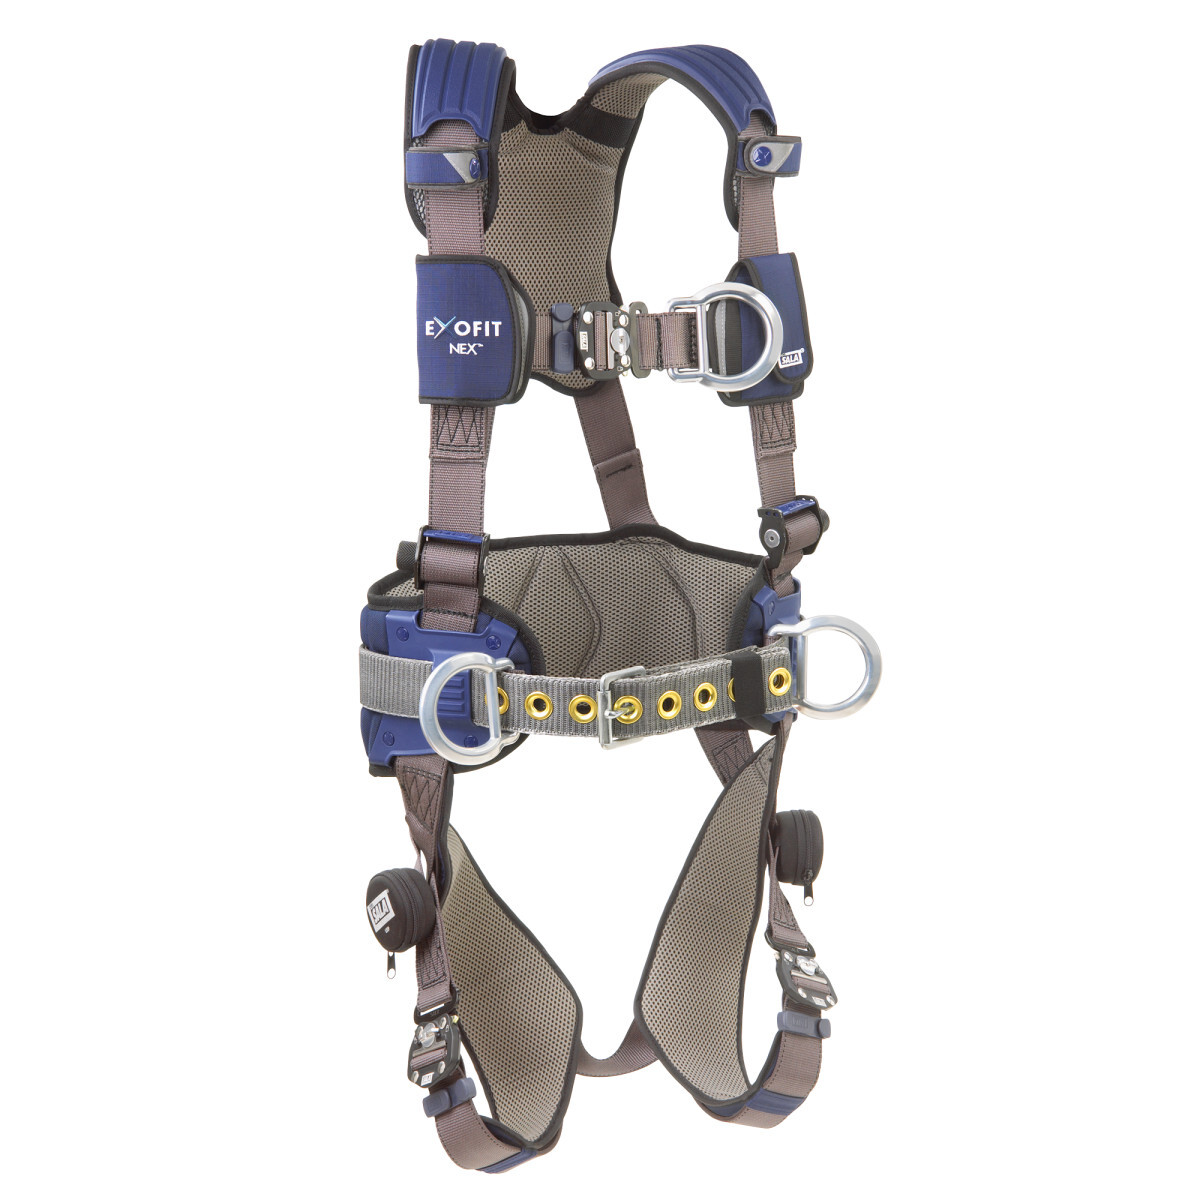 3M™ DBI-SALA® Small ExoFit NEX™ Construction/Full Body Style Harness With Tech-Lite™ Aluminum Back, Front And Side D-Ring, Duo-L